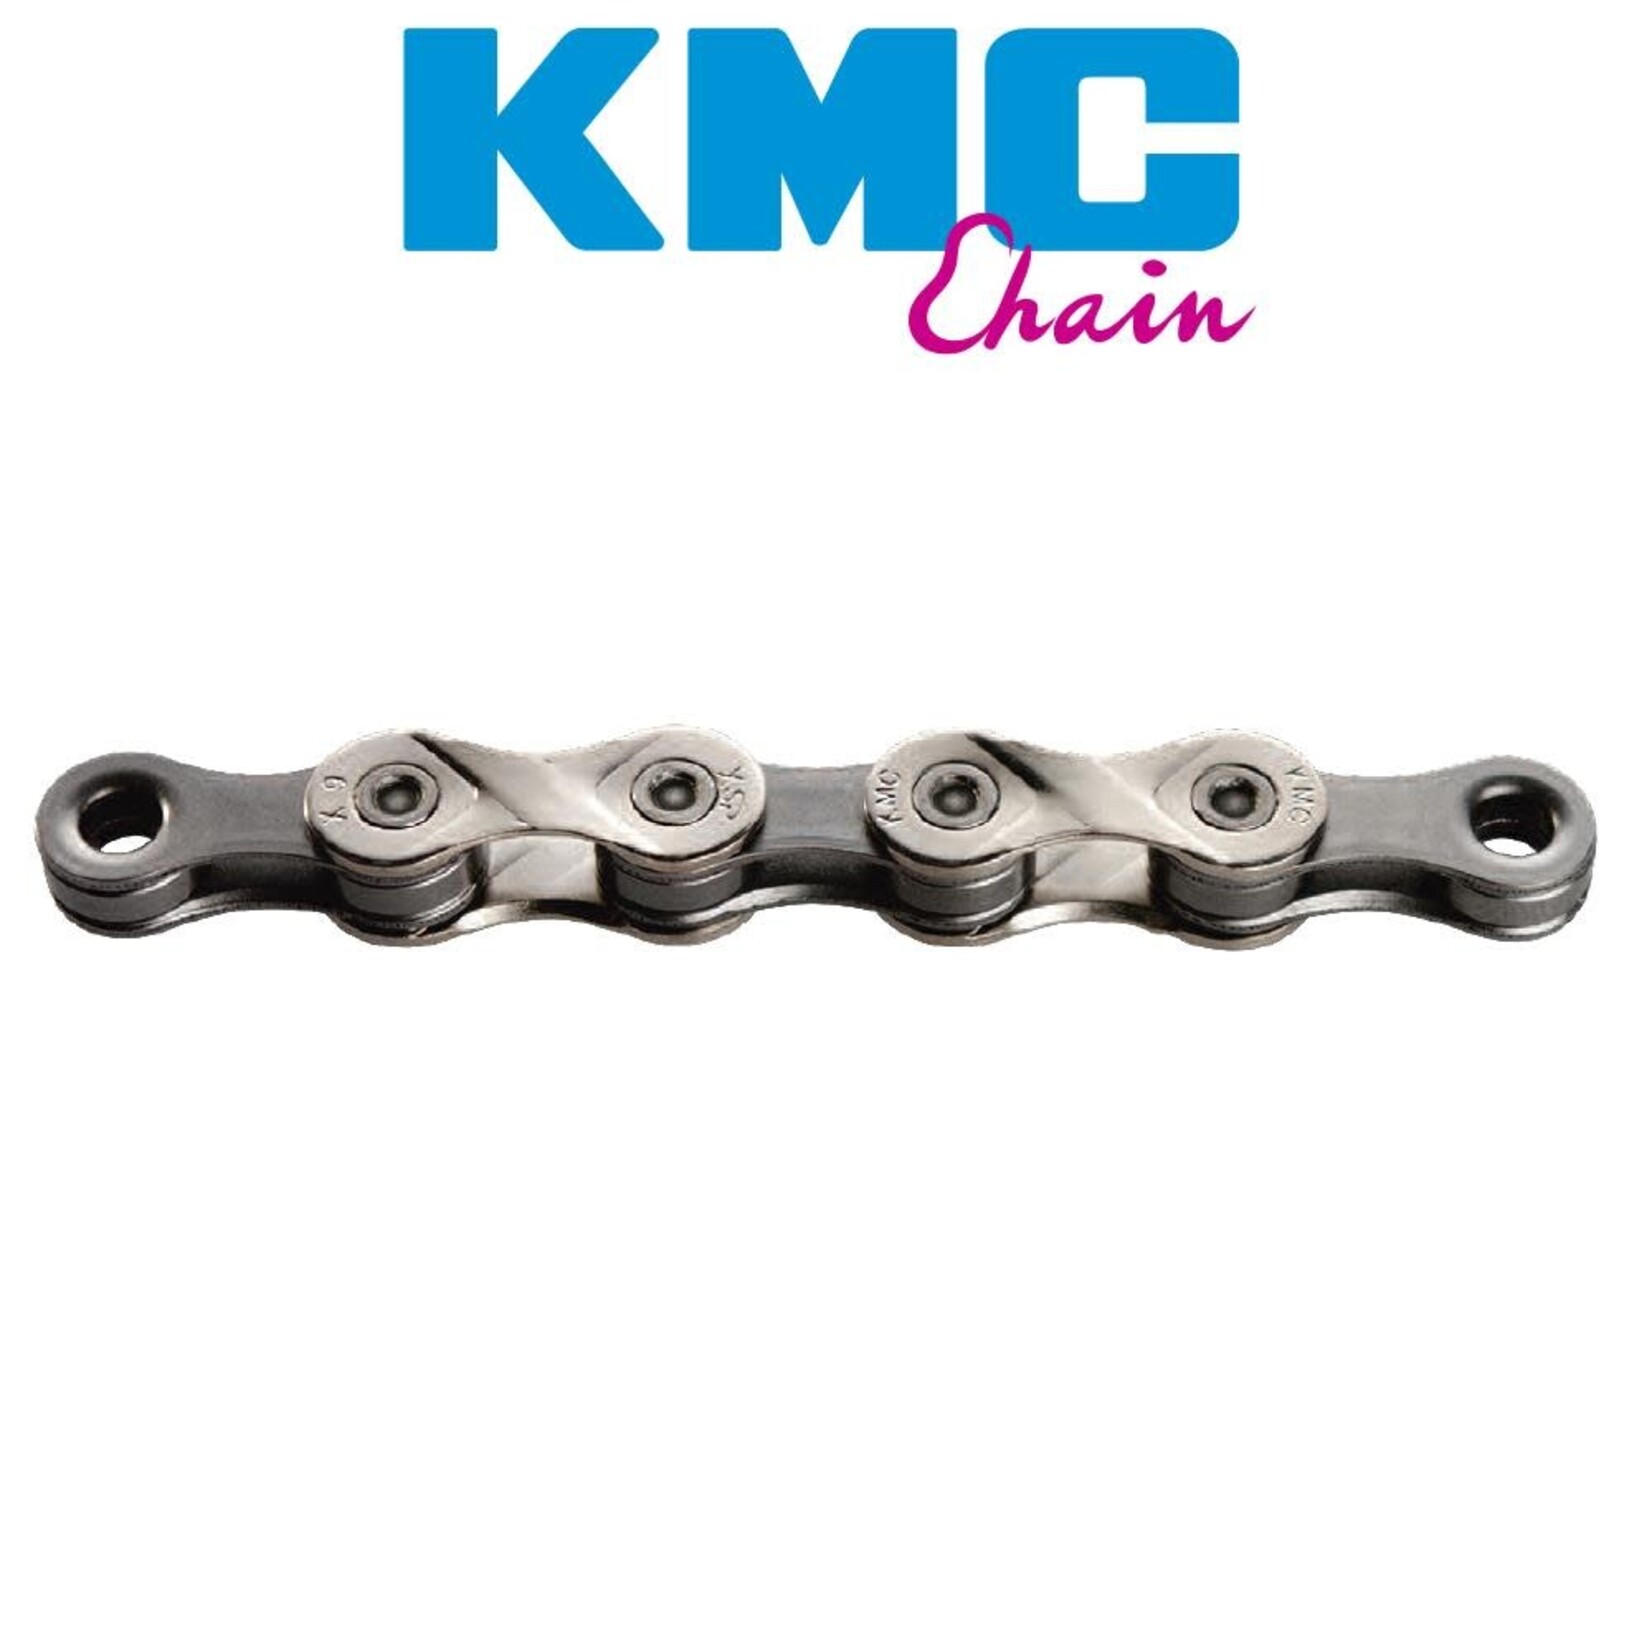 KMC CHAIN X8 for 6/7/8 SPEED 116 links with Quick Link